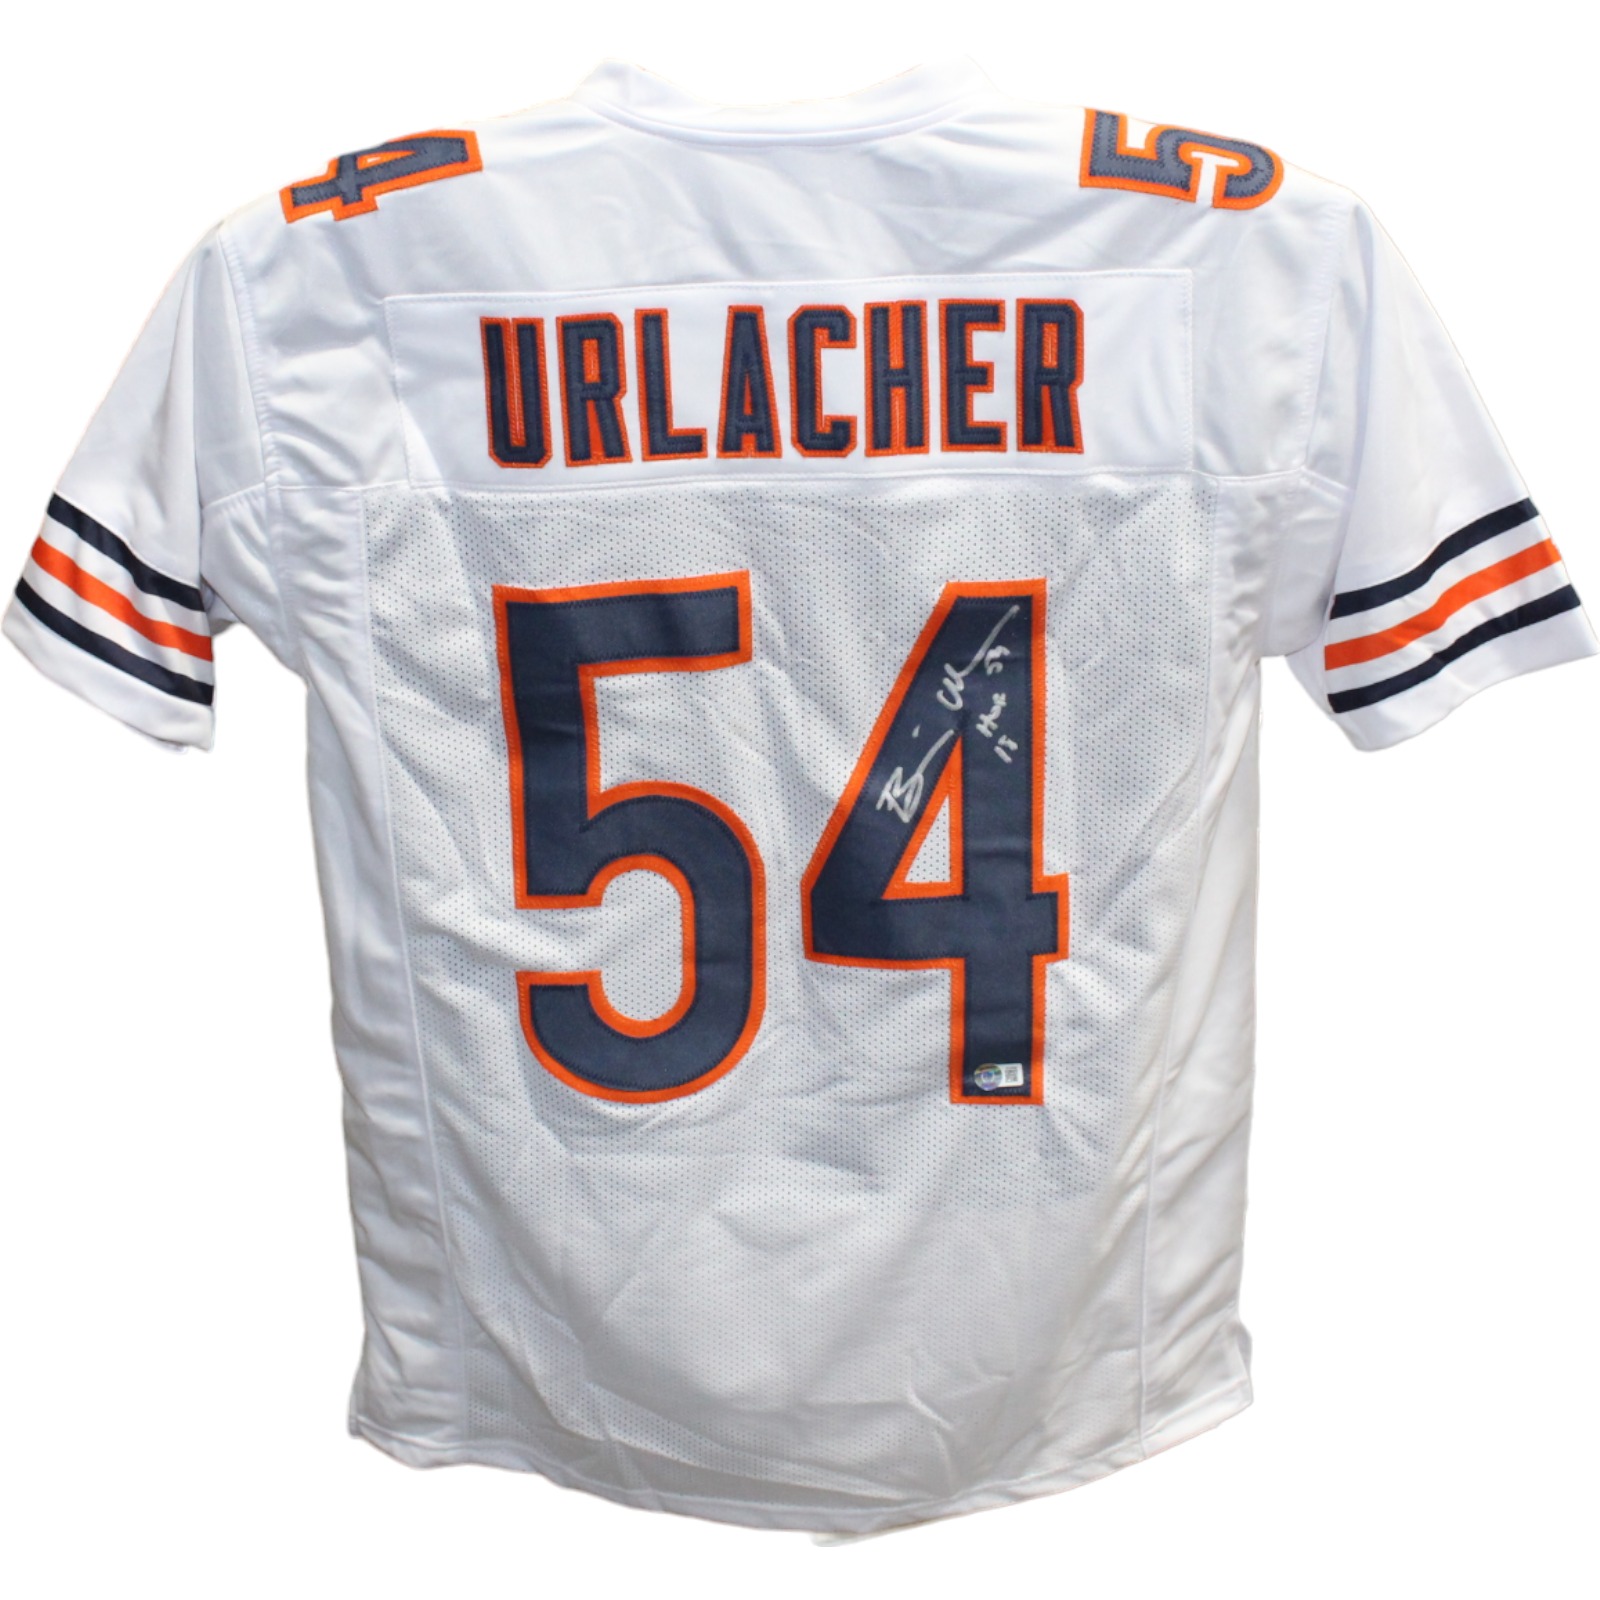 Brian Urlacher Autographed/Signed Pro Style White Jersey HOF Beckett